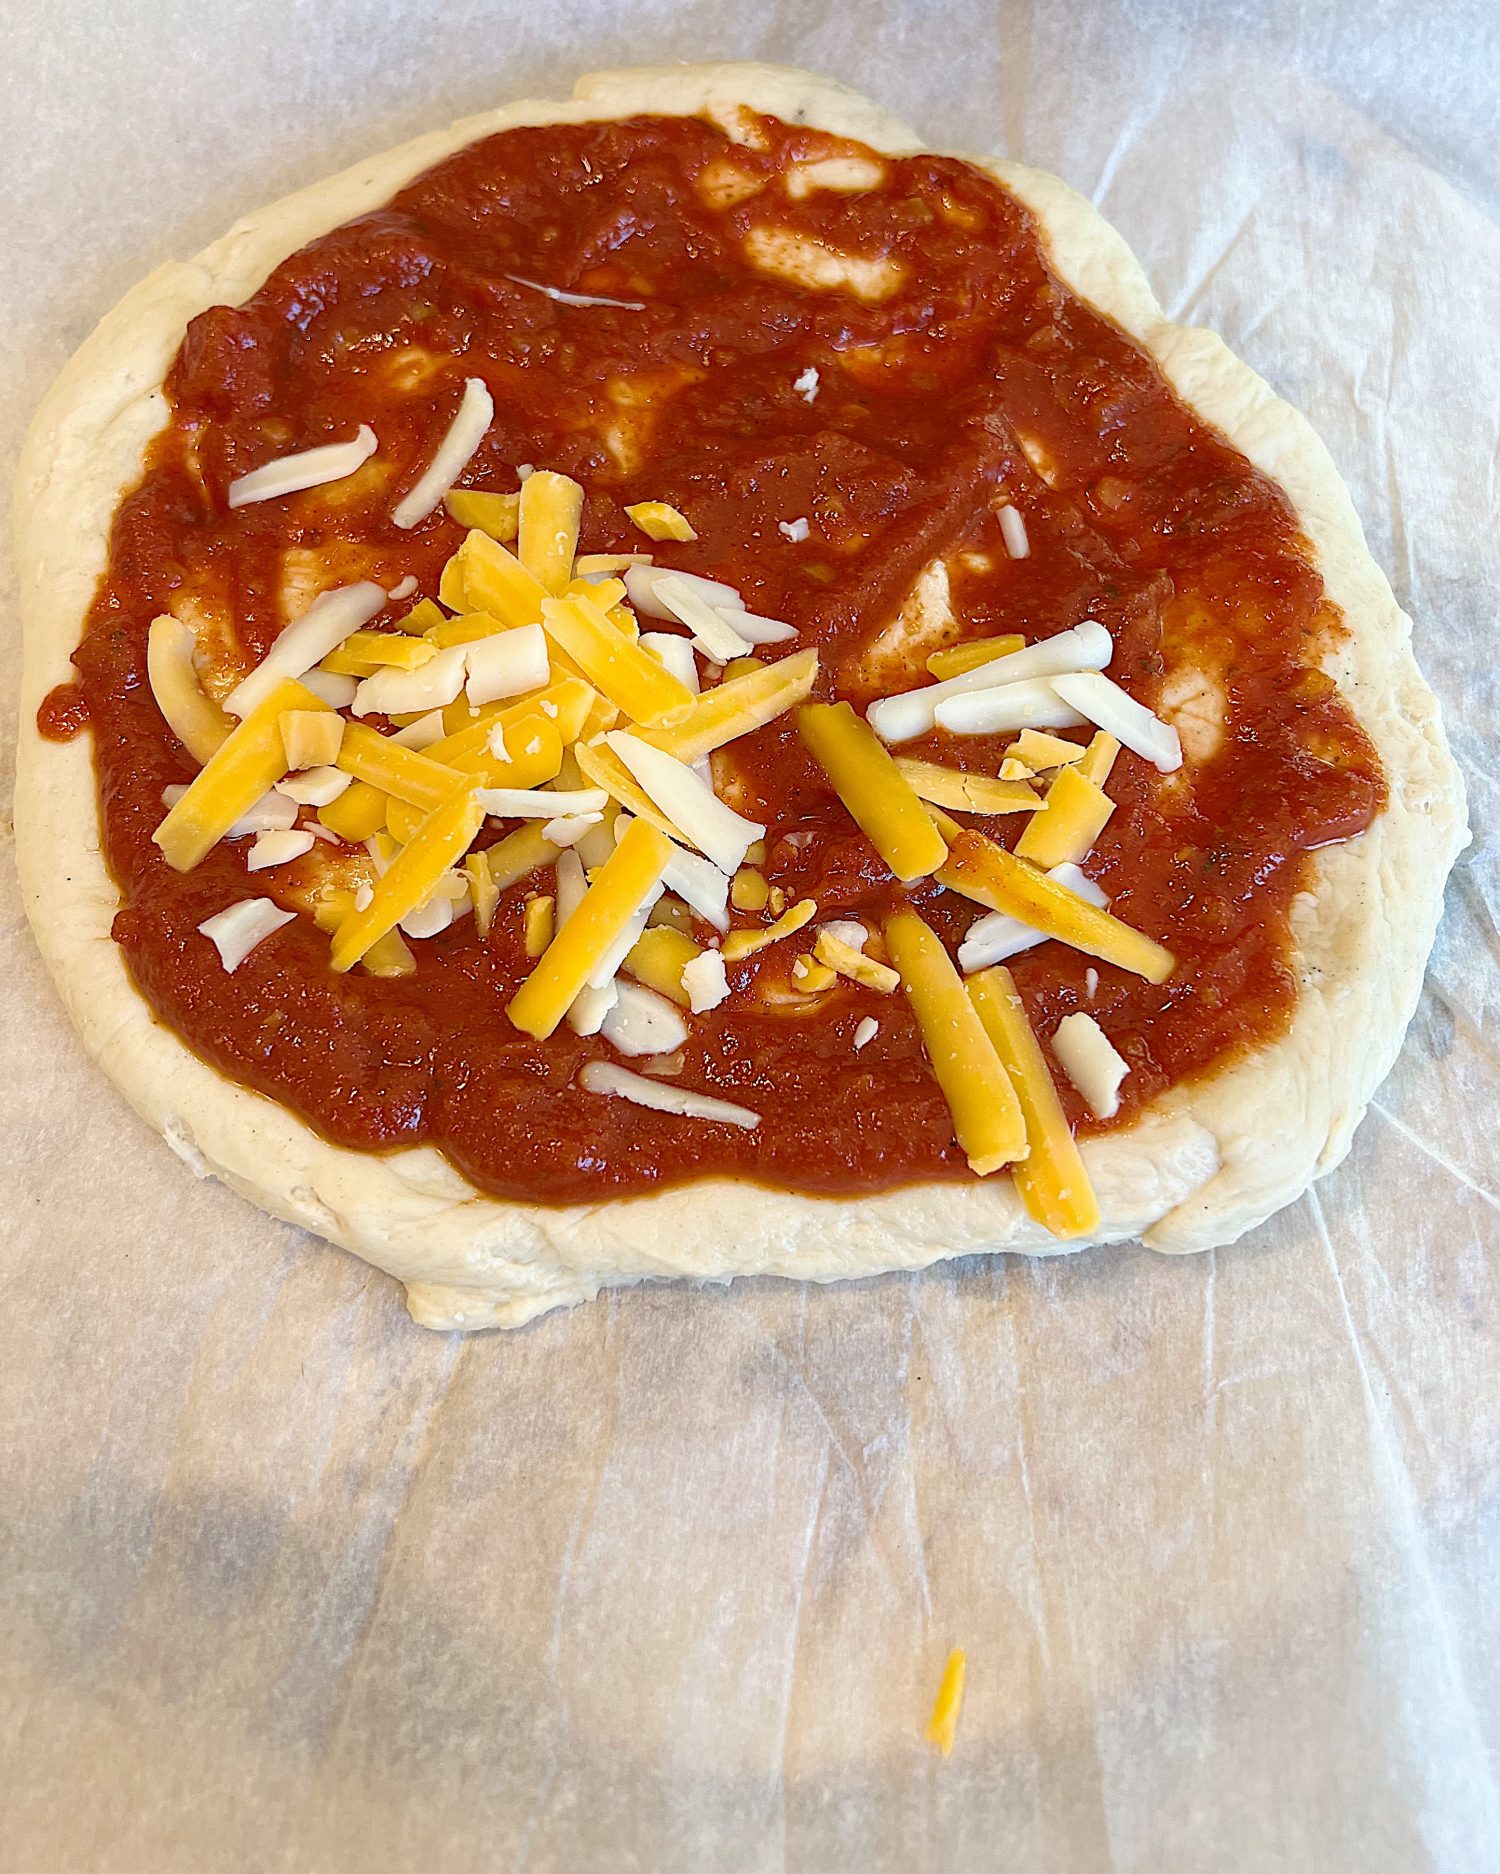 How to Make Mexican Pizza